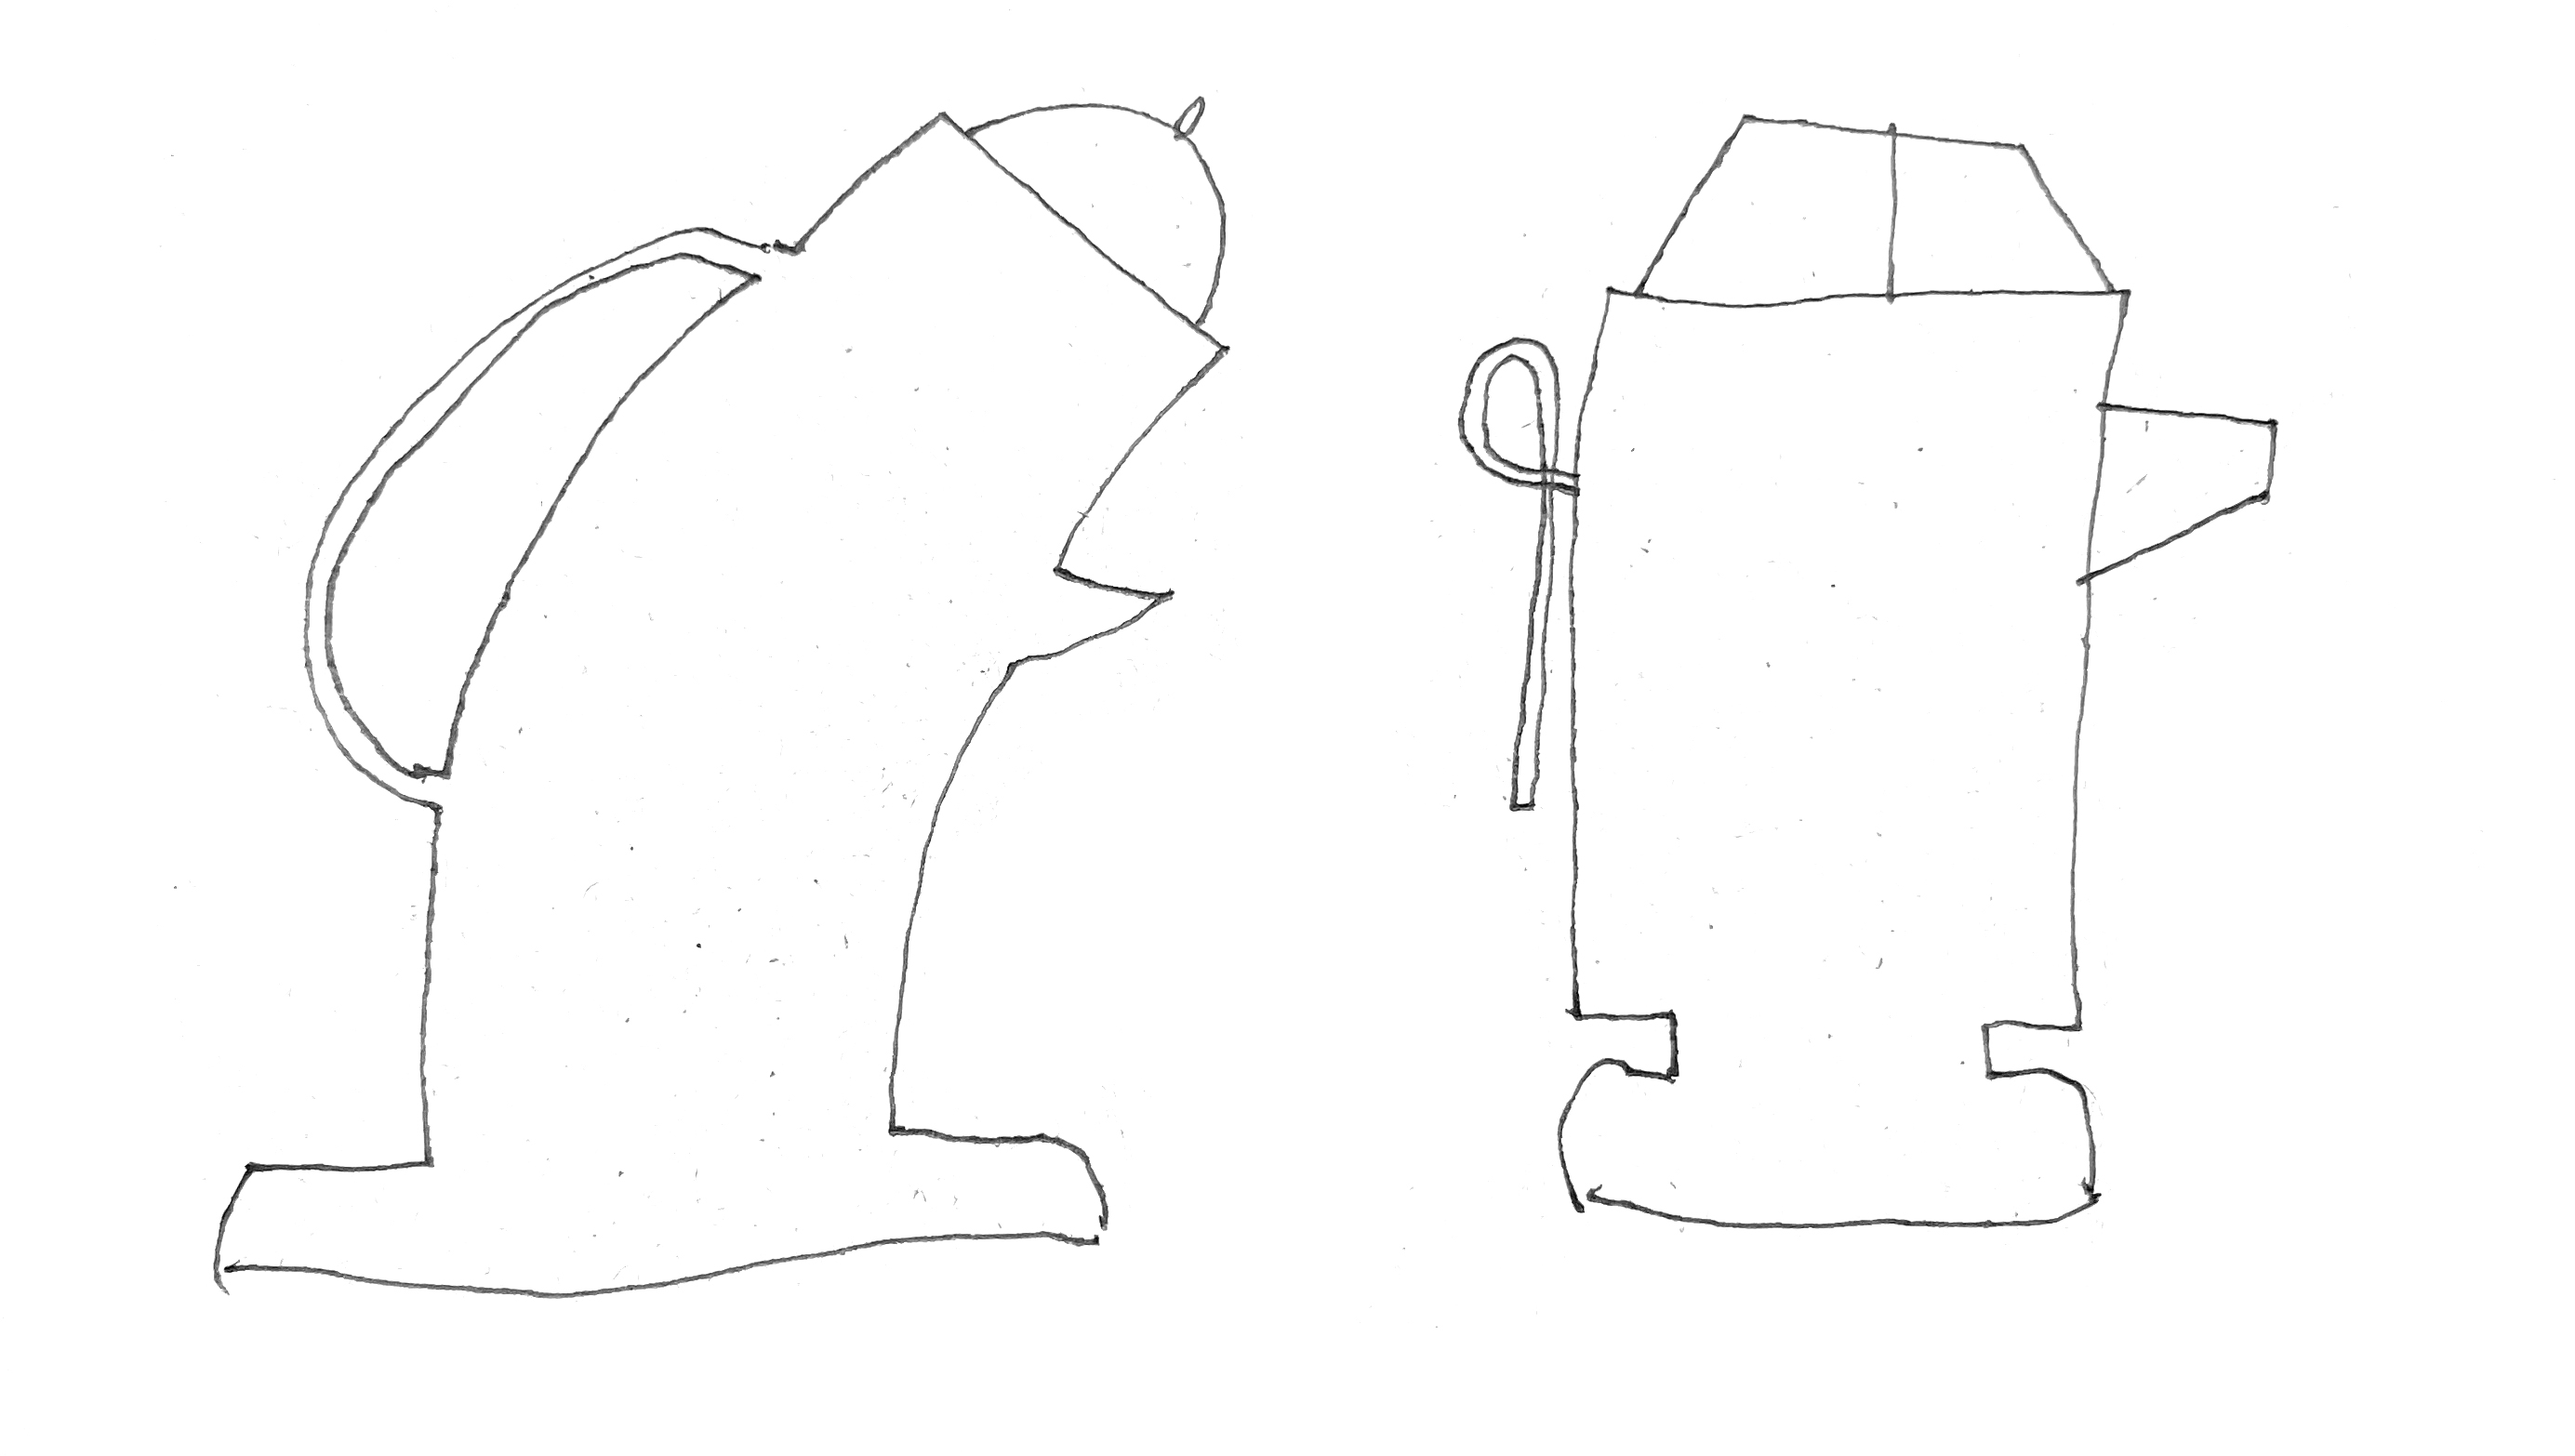 pencil drawings of two teapots, one bending towards the other